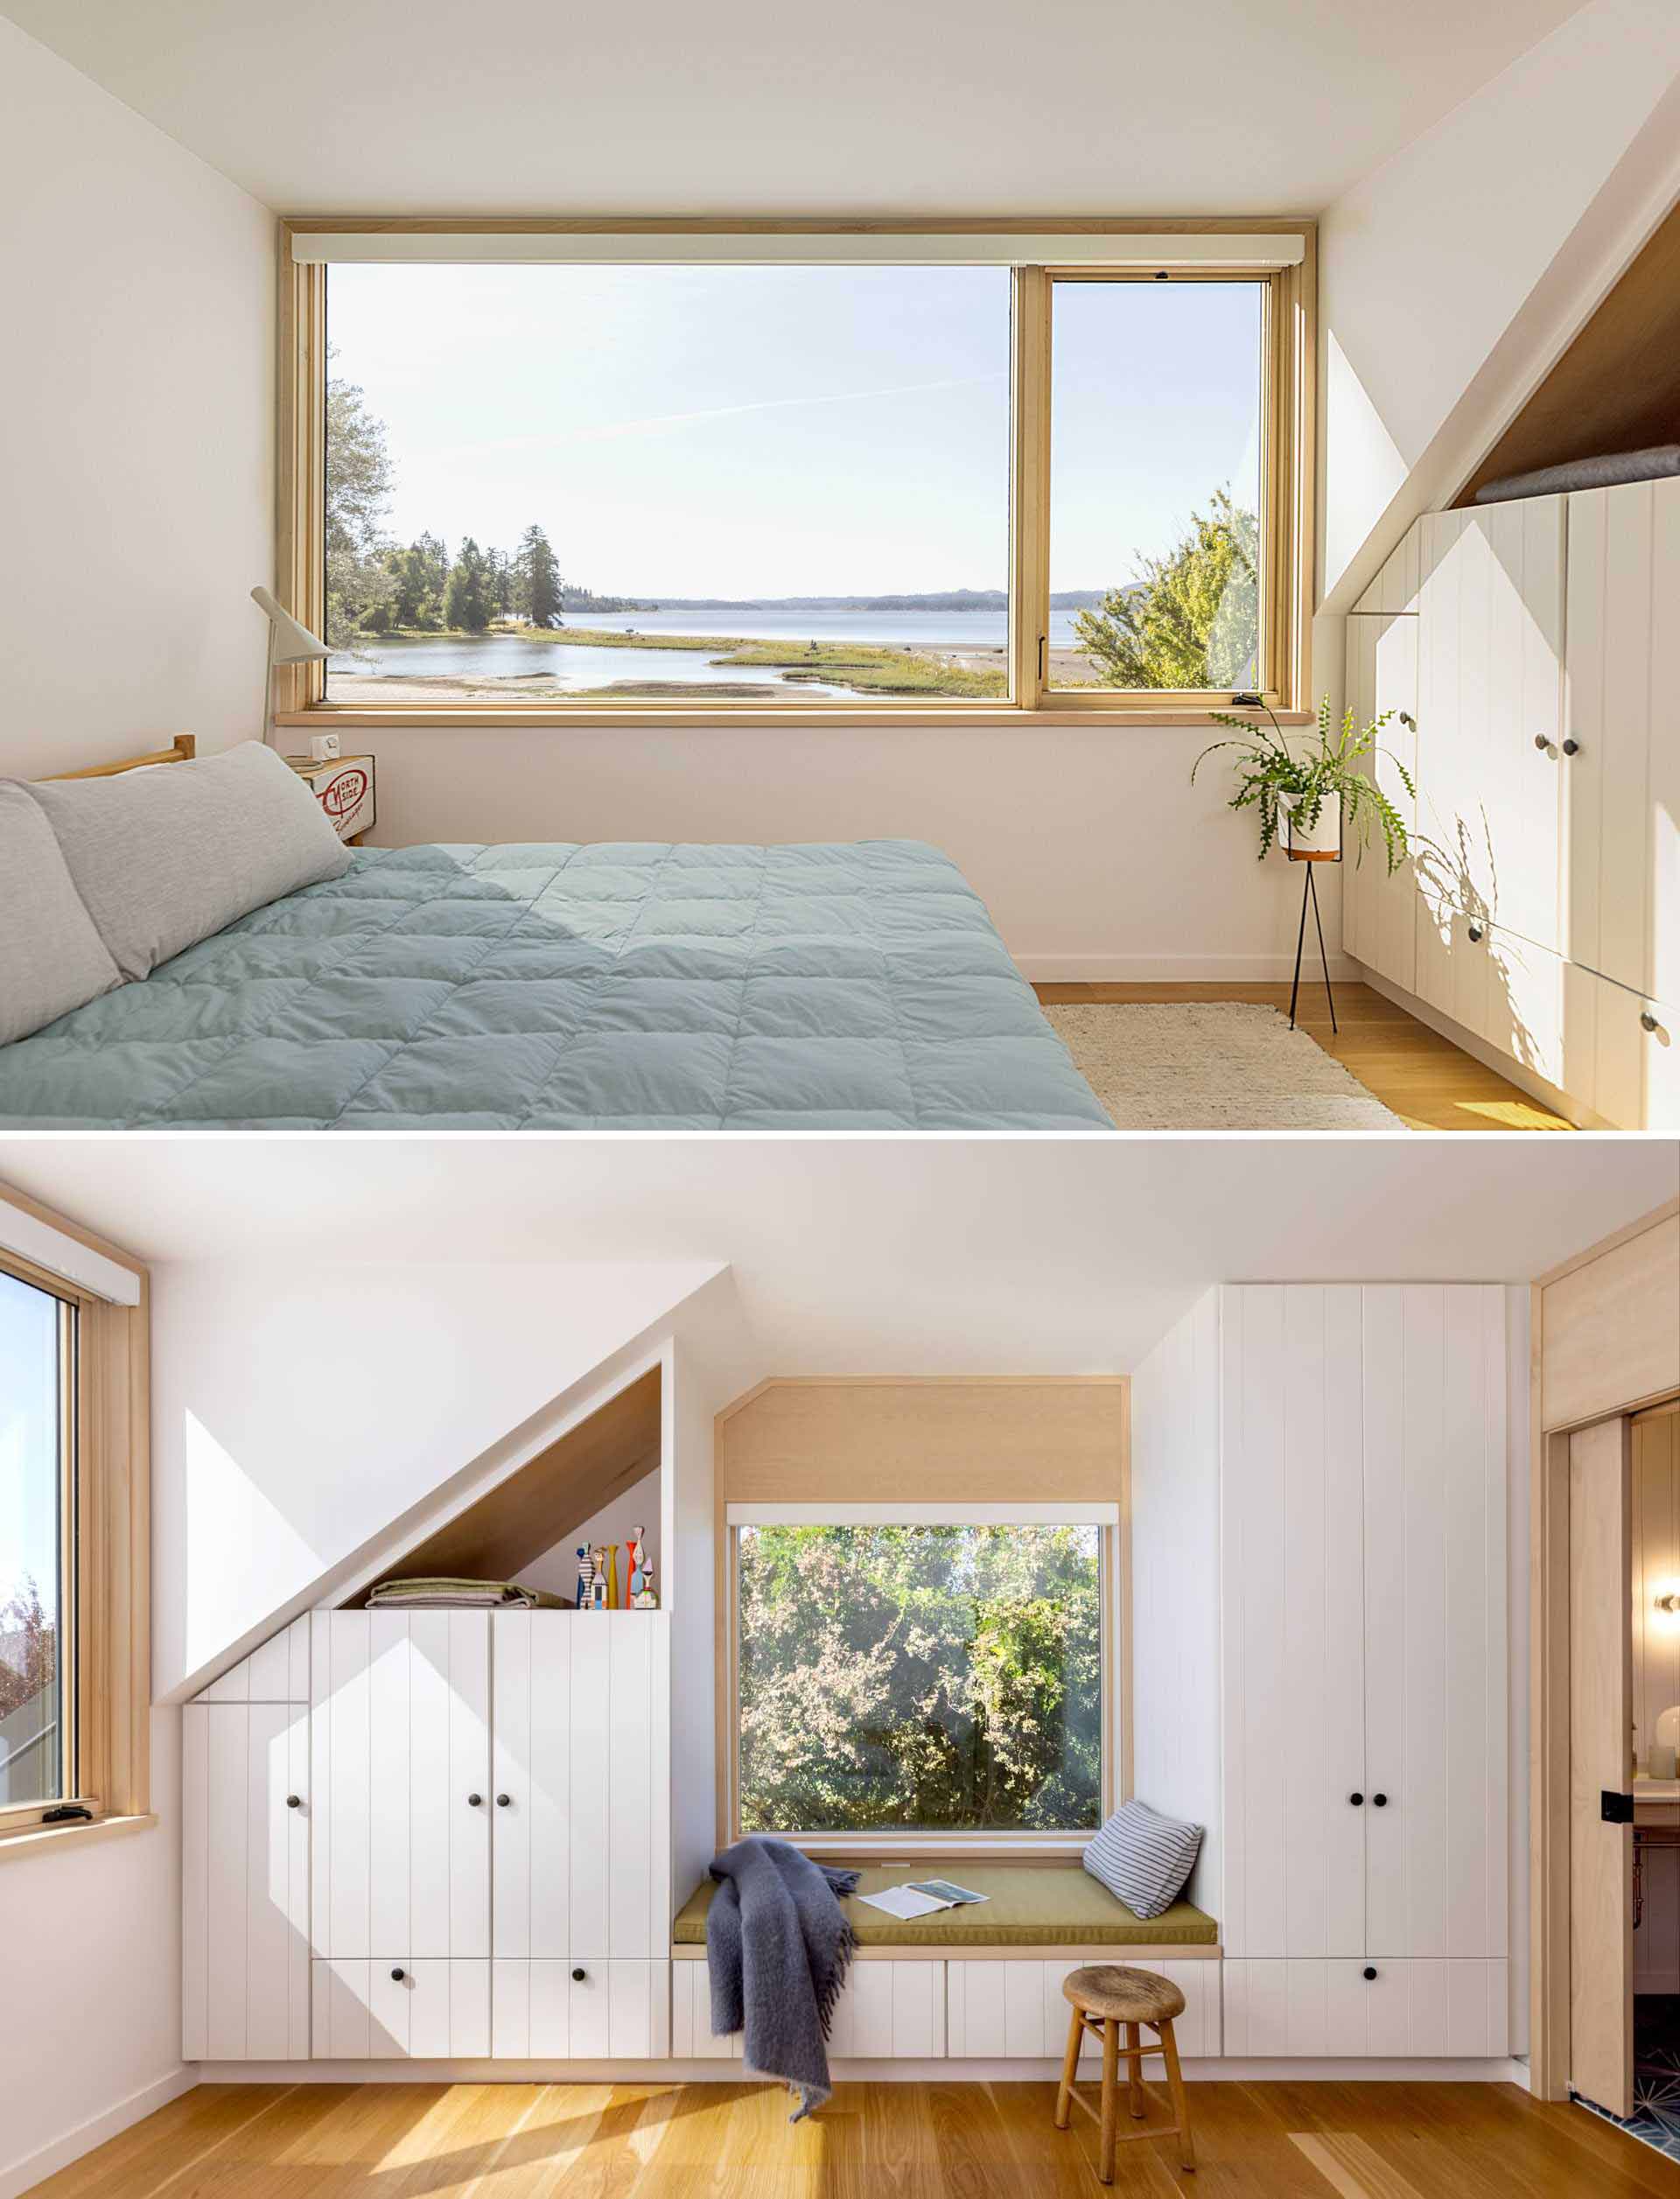 A contemporary farmhouse-inspired bedroom with a picture window, built-in storage, and a window beach.